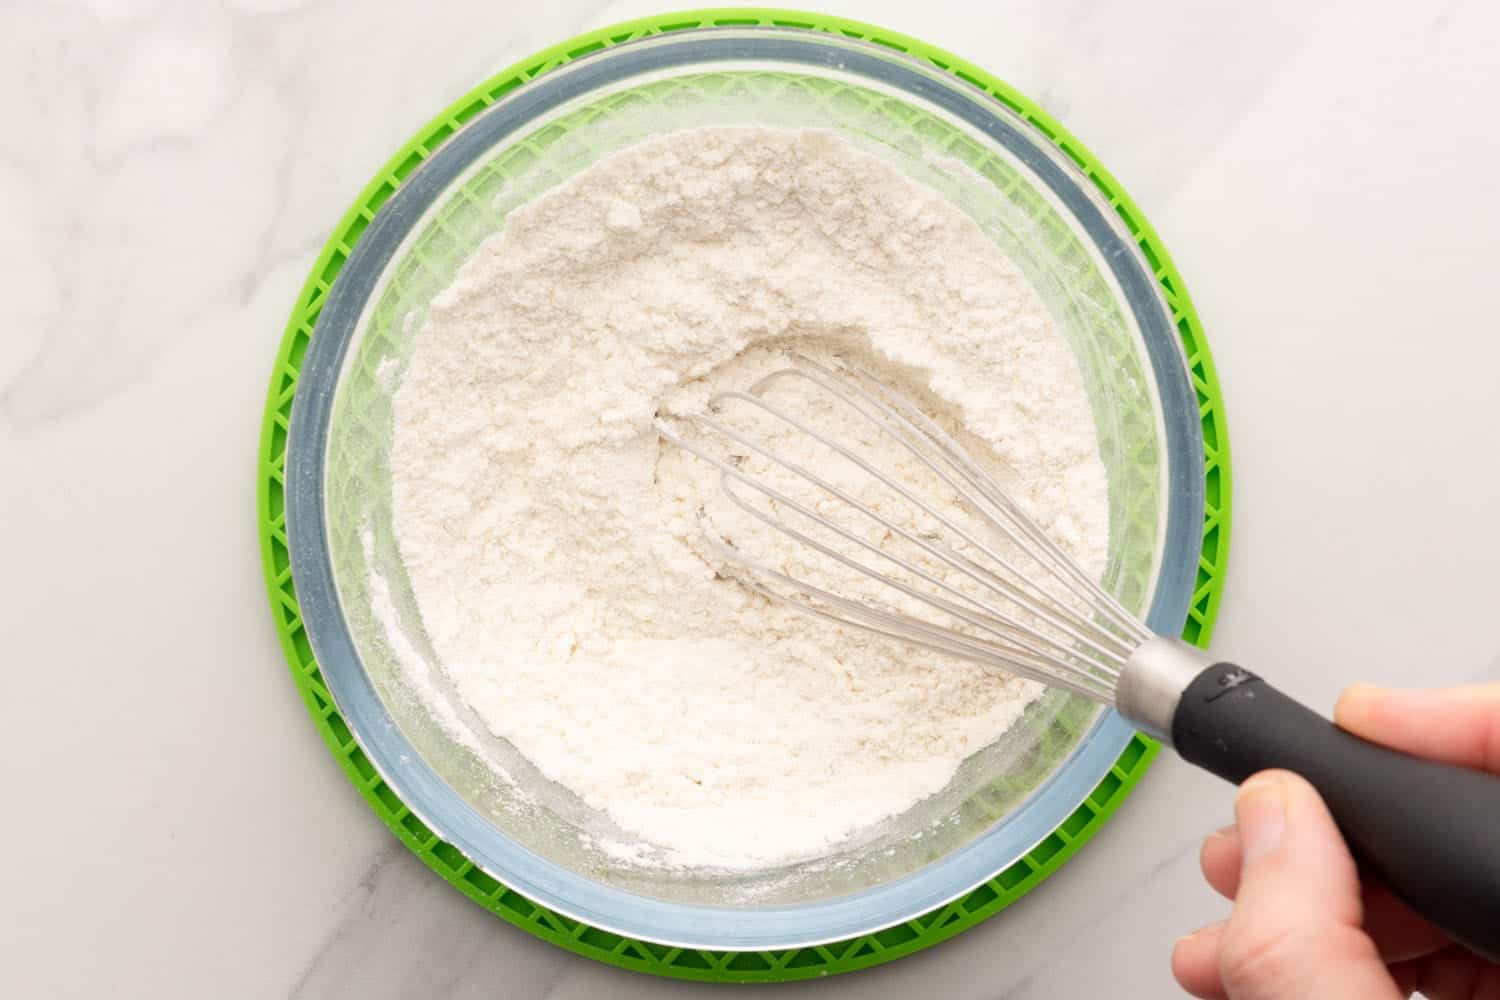 dry ingredients for pancake batter in a bowl with a whisk.